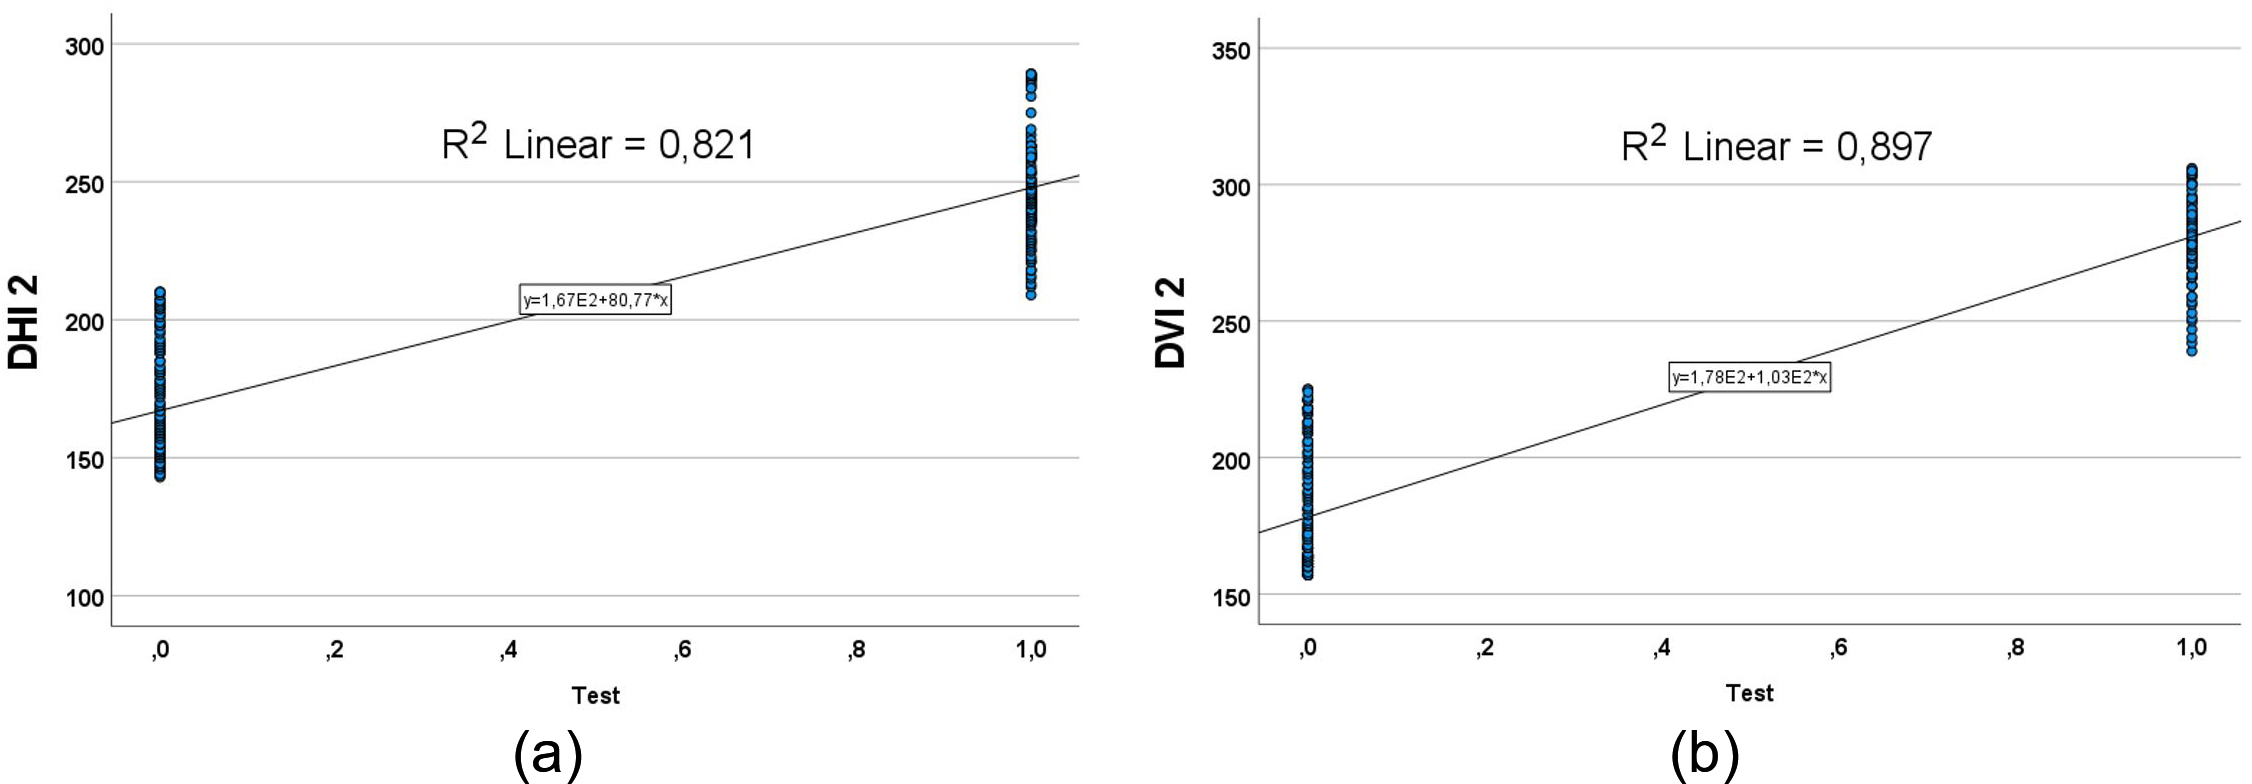 Point-biserial correlation coefficients show a relation between the values of DHI 2 (a), and DVI 2 (b) for pair of days, reference (0) and the test (1).